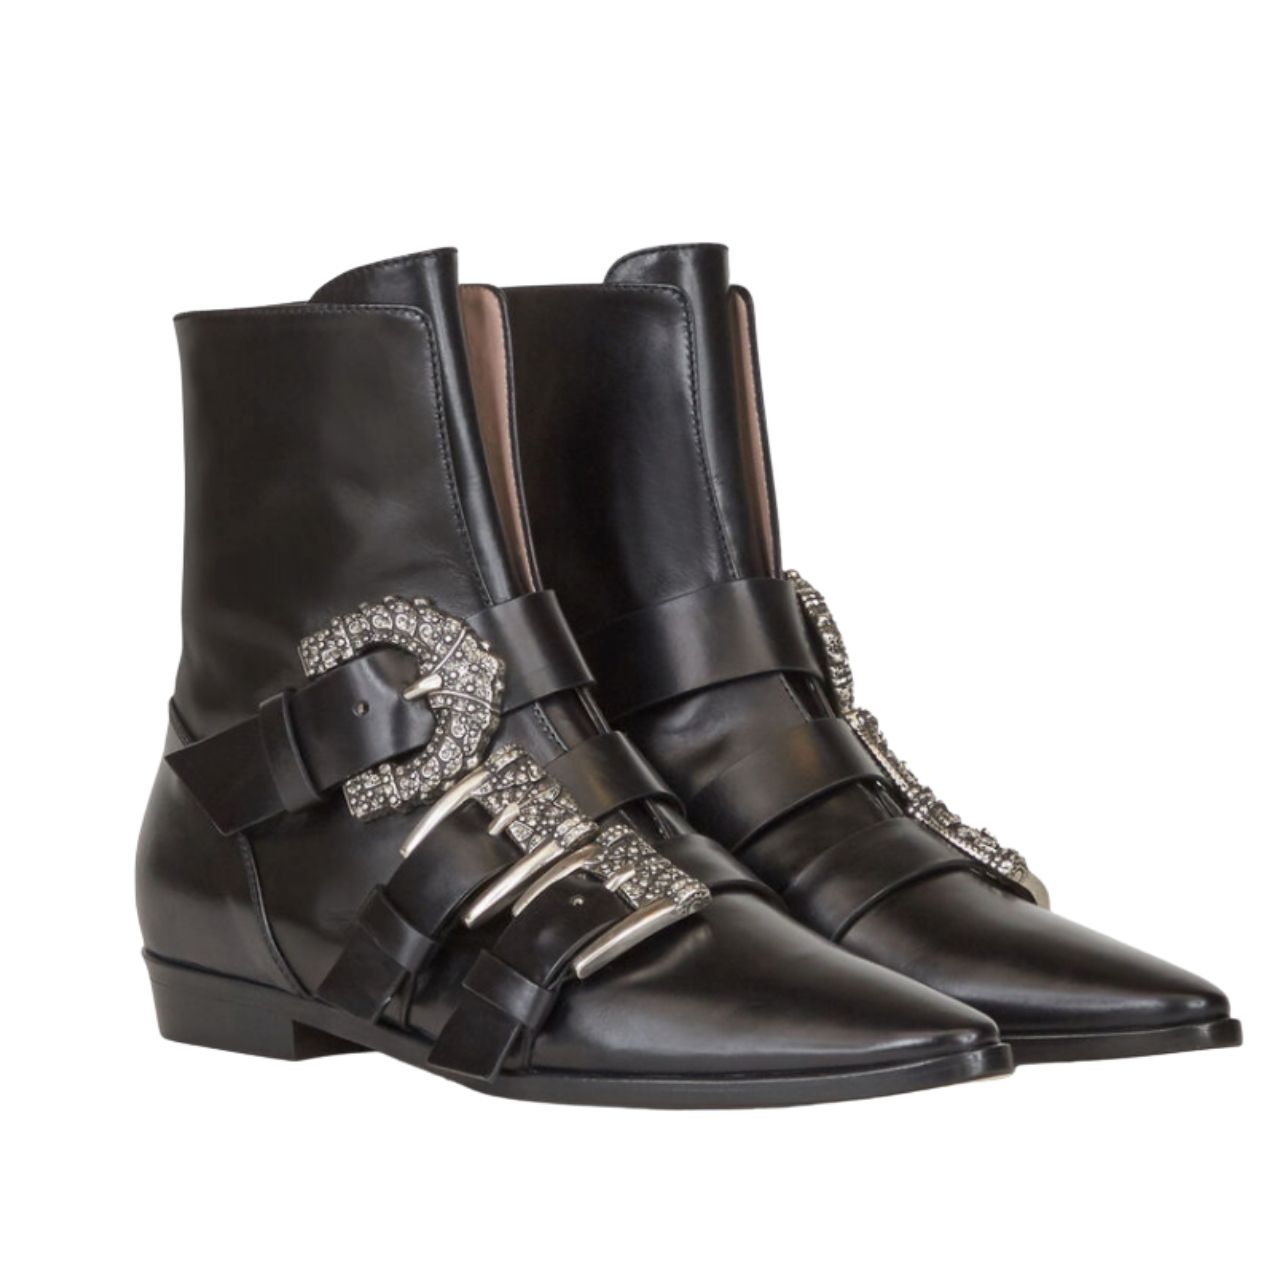 Etro black ankle height books with oversized jeweled buckles